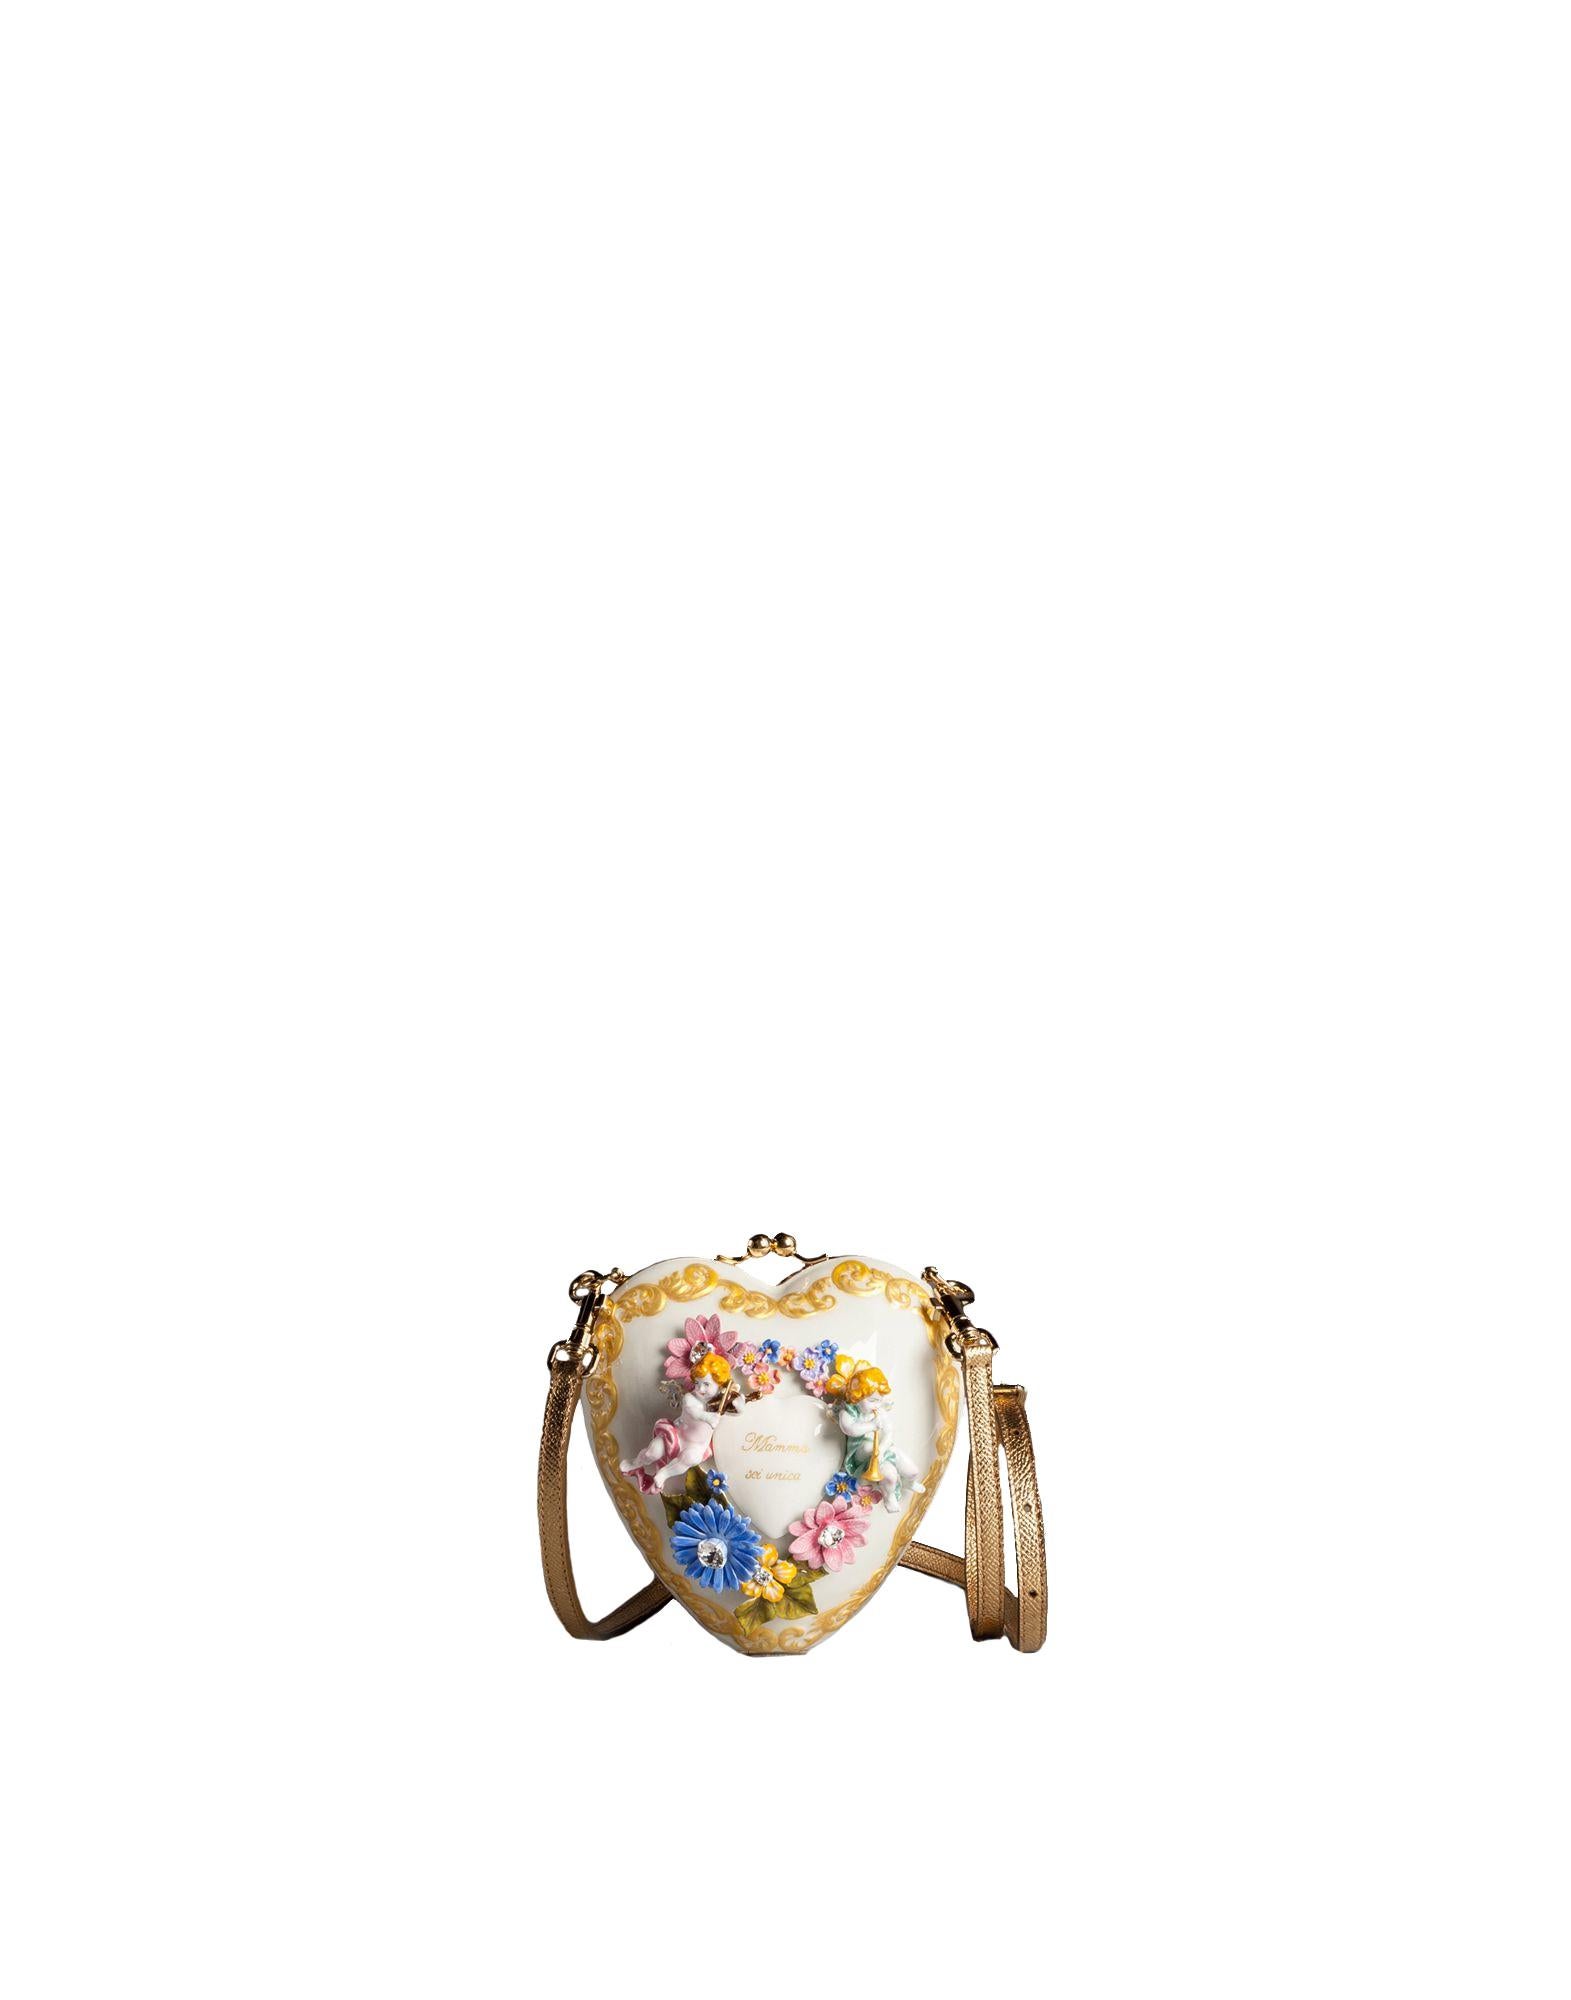 Gorgeous brand new with tags, 100% Authentic Dolce & Gabbana BOX bag purse.
Model: Sacred Heart Cuore
Style: Hand shoulder clutch
Material: 10% Aluminum, 10% Crystal, Porslin, Crystal, leather
Color: White with multicolor hand painted floral, gold